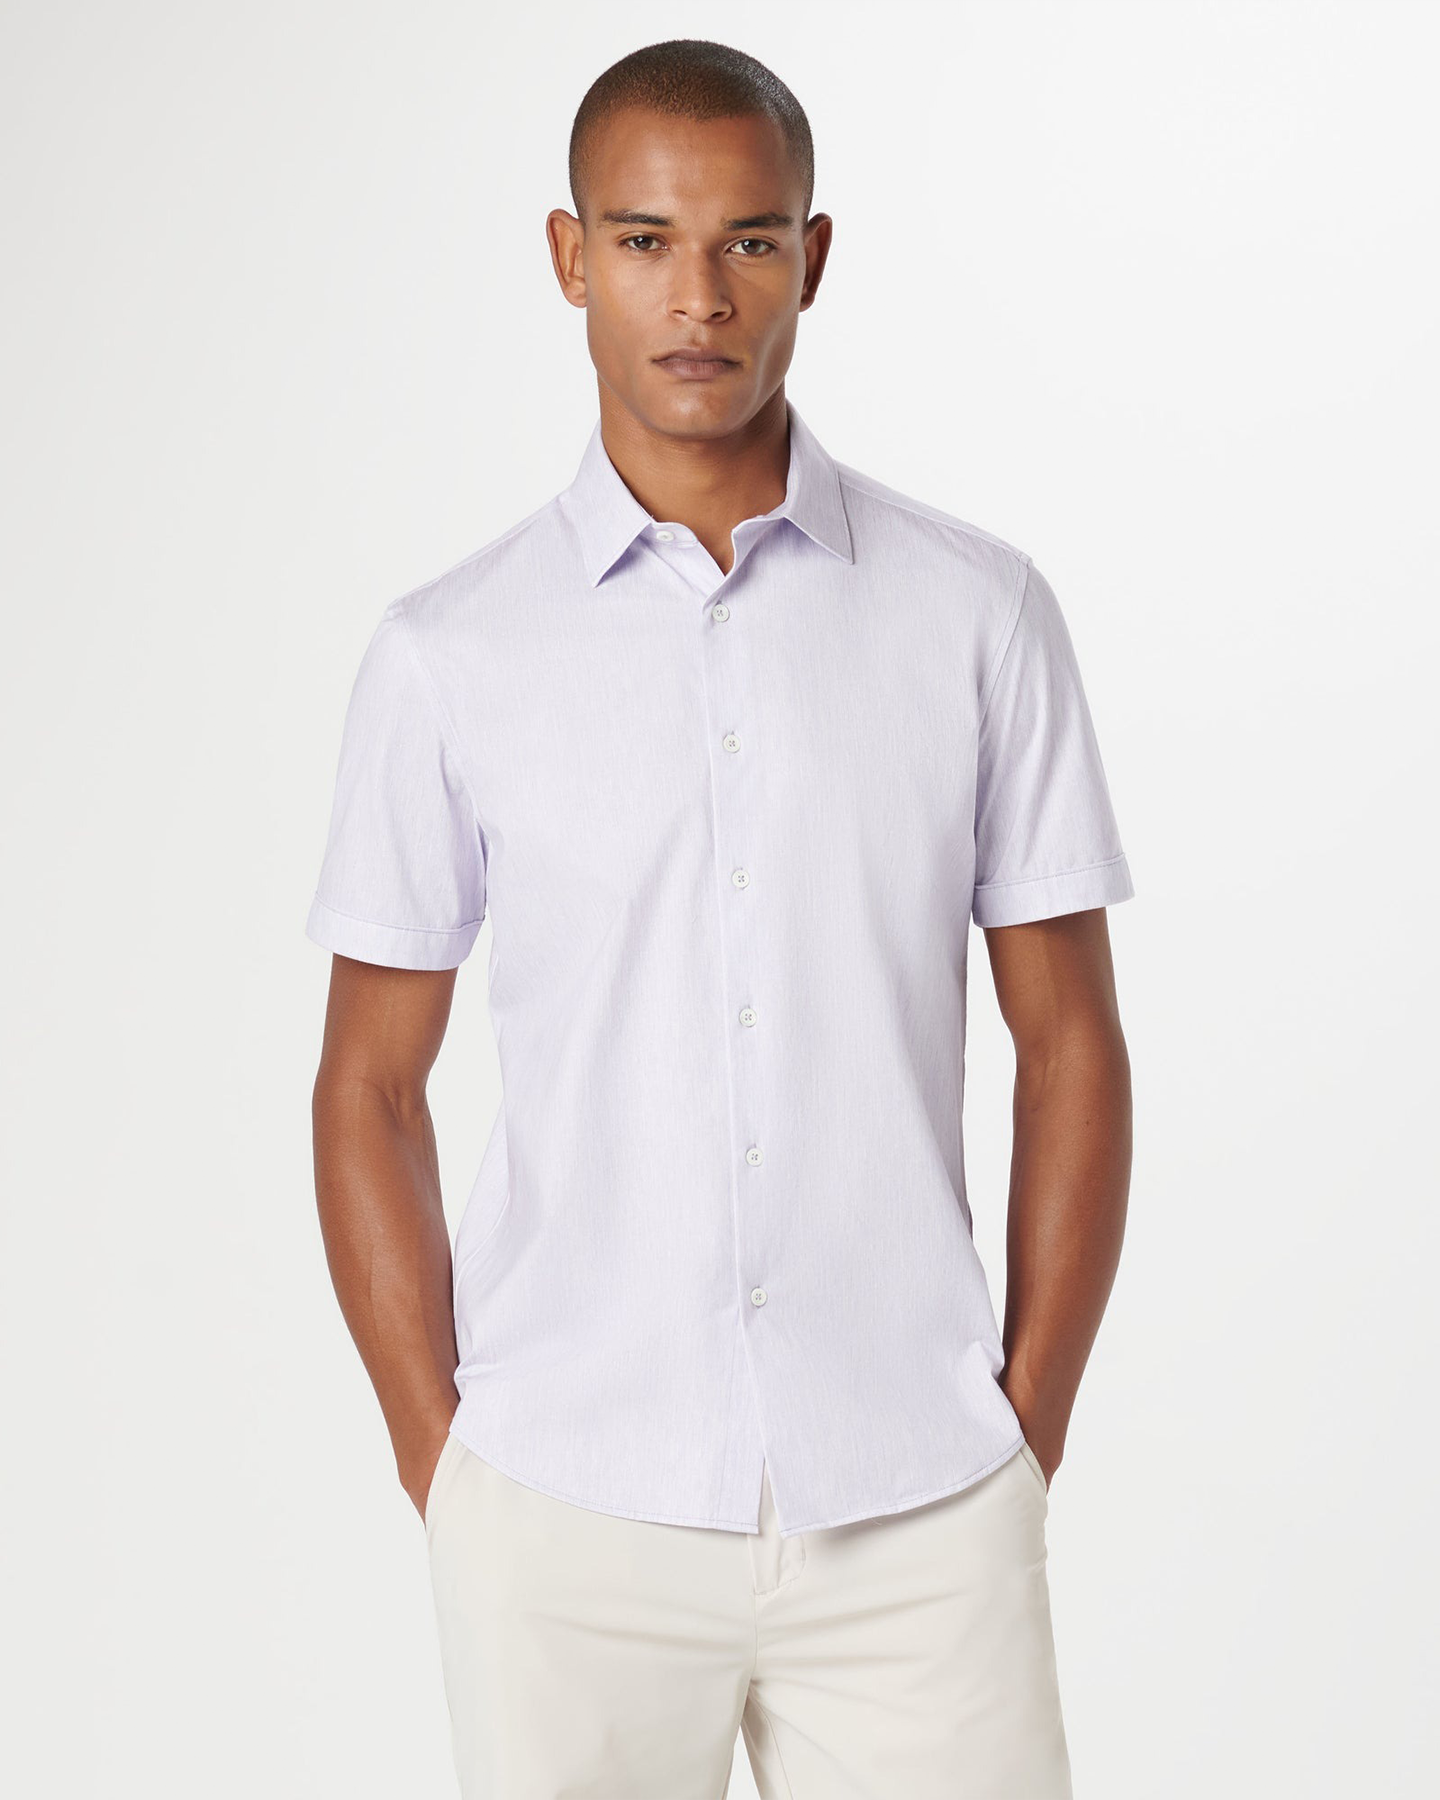 ABSTRACT STRIPE 8 WAY STRETCH SHIRT - LAVENDER